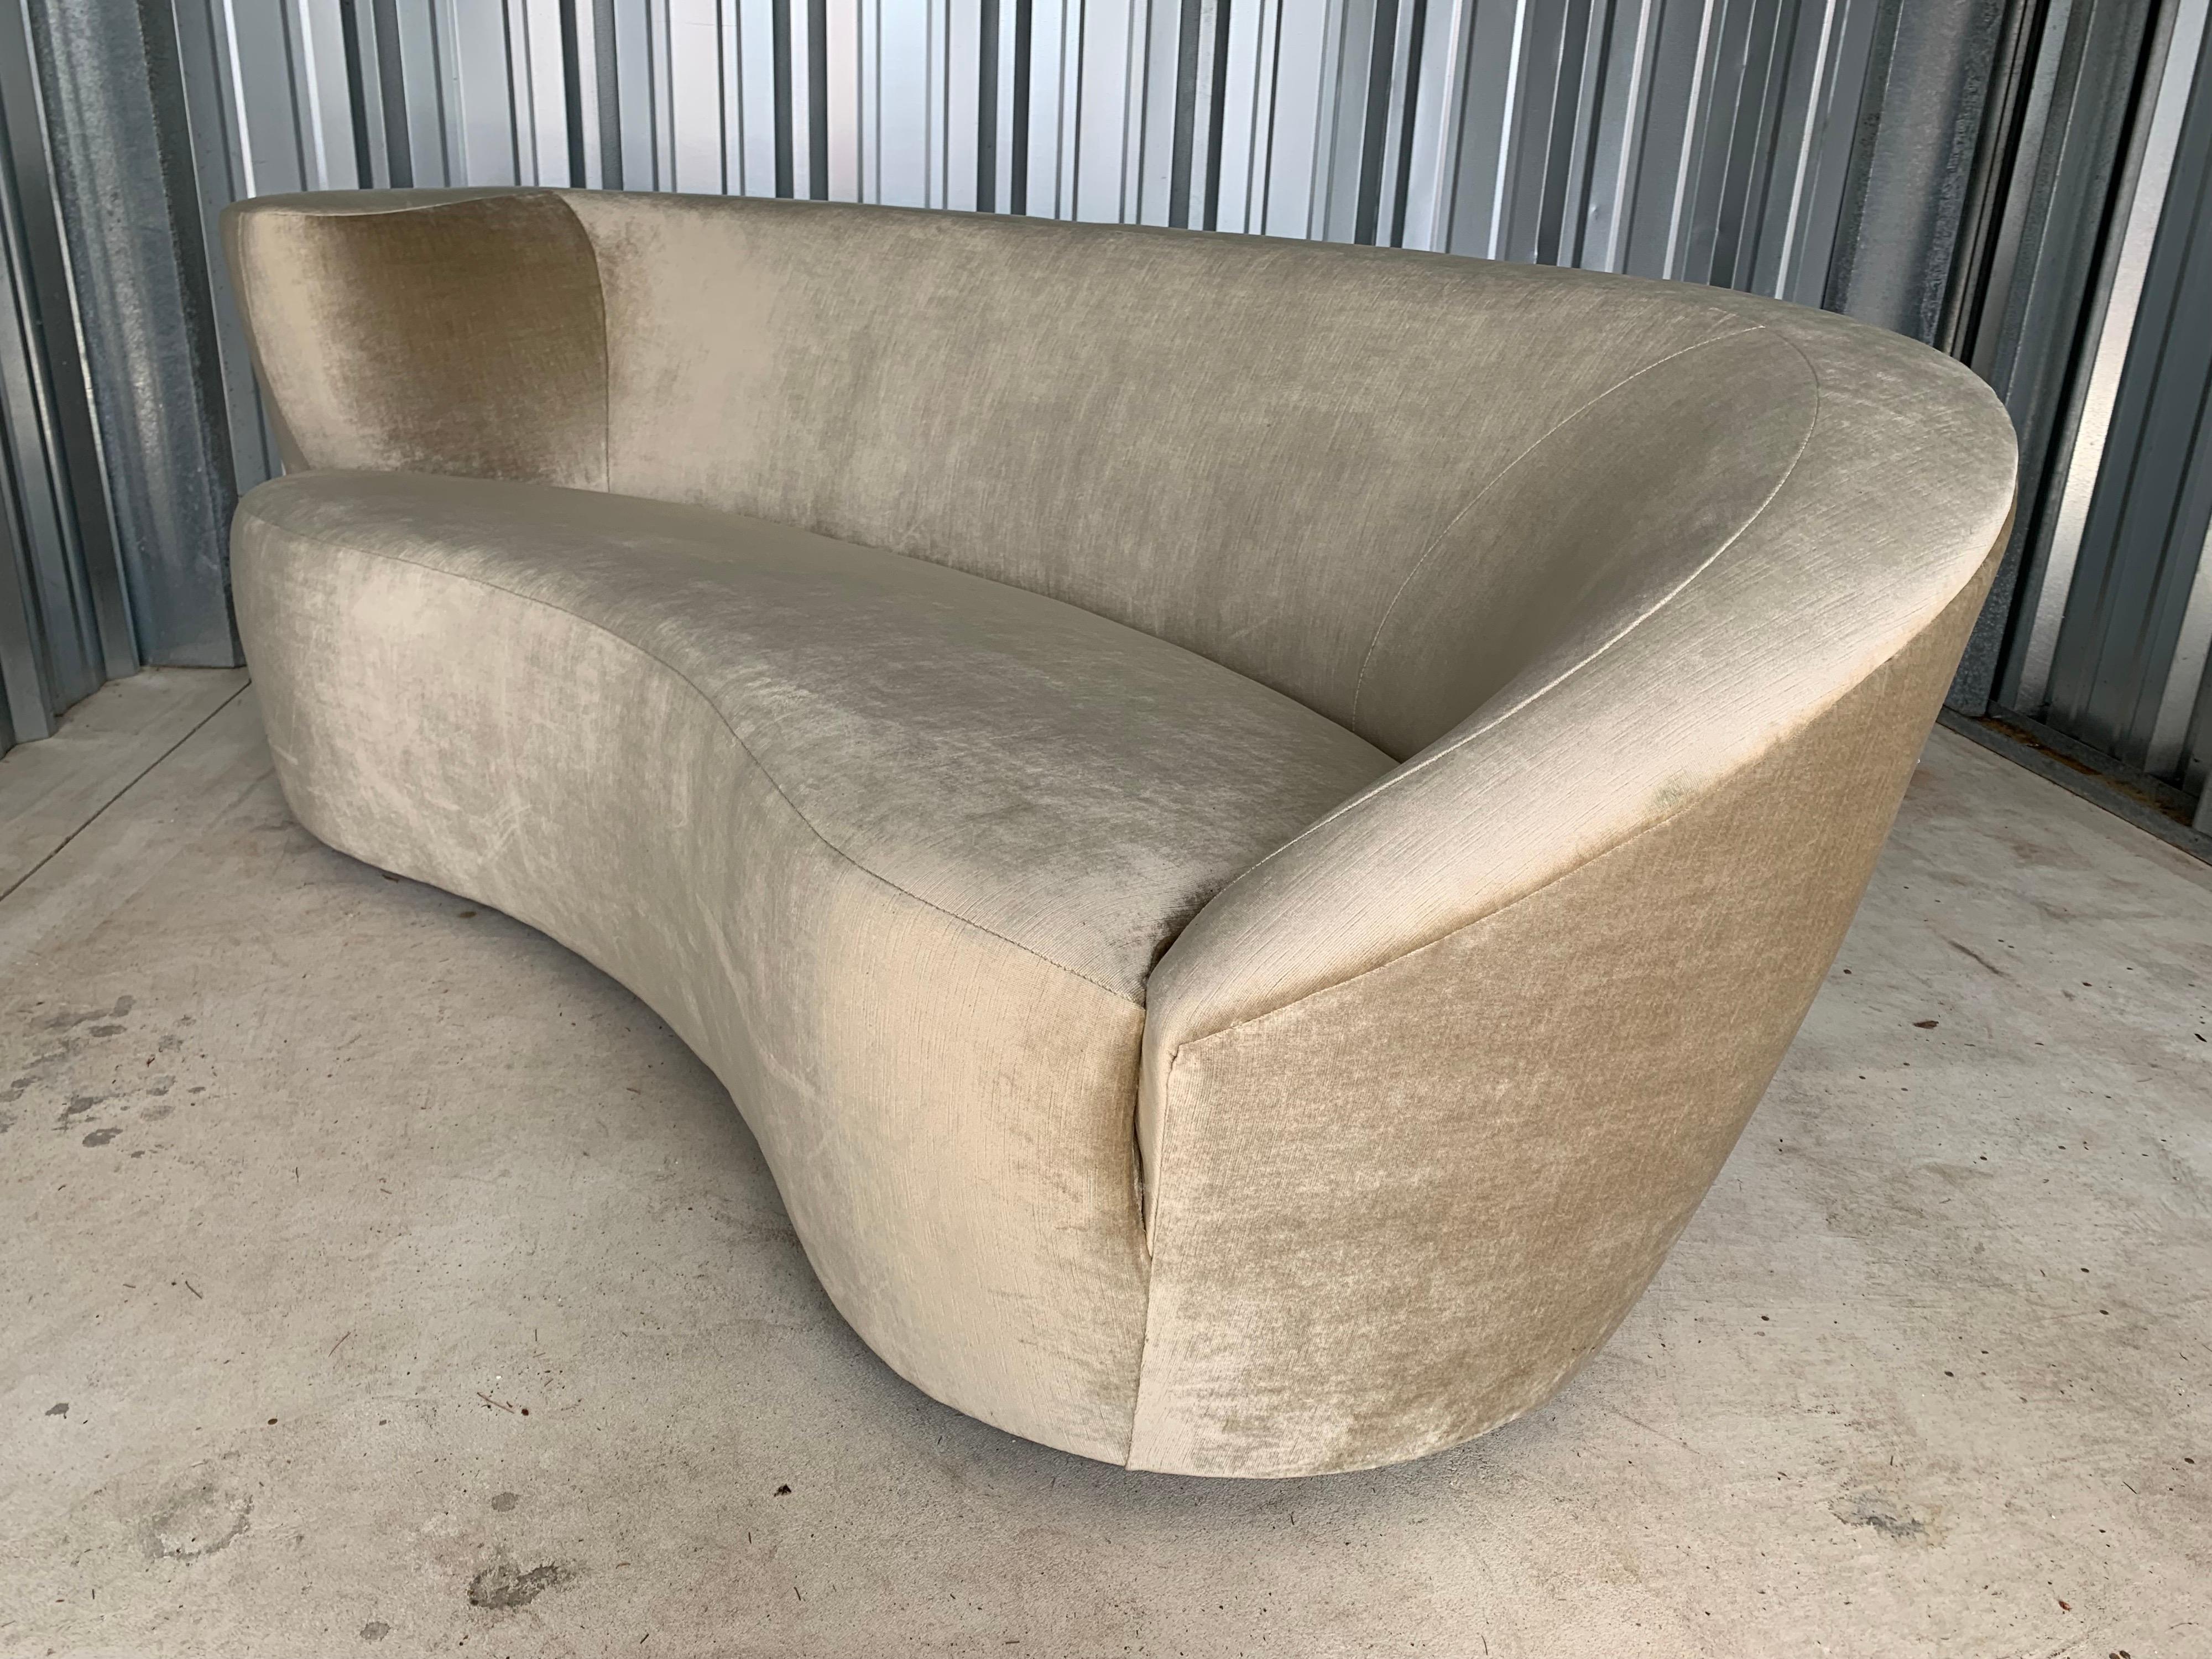 A beautiful sofa having round curved features throughout designed by Vladimir Kagan for his ‘Nautilus’ series and produced by Directional Furniture Company. Newly upholstered in “Moon Beam” velvet with beautiful striations through the high end